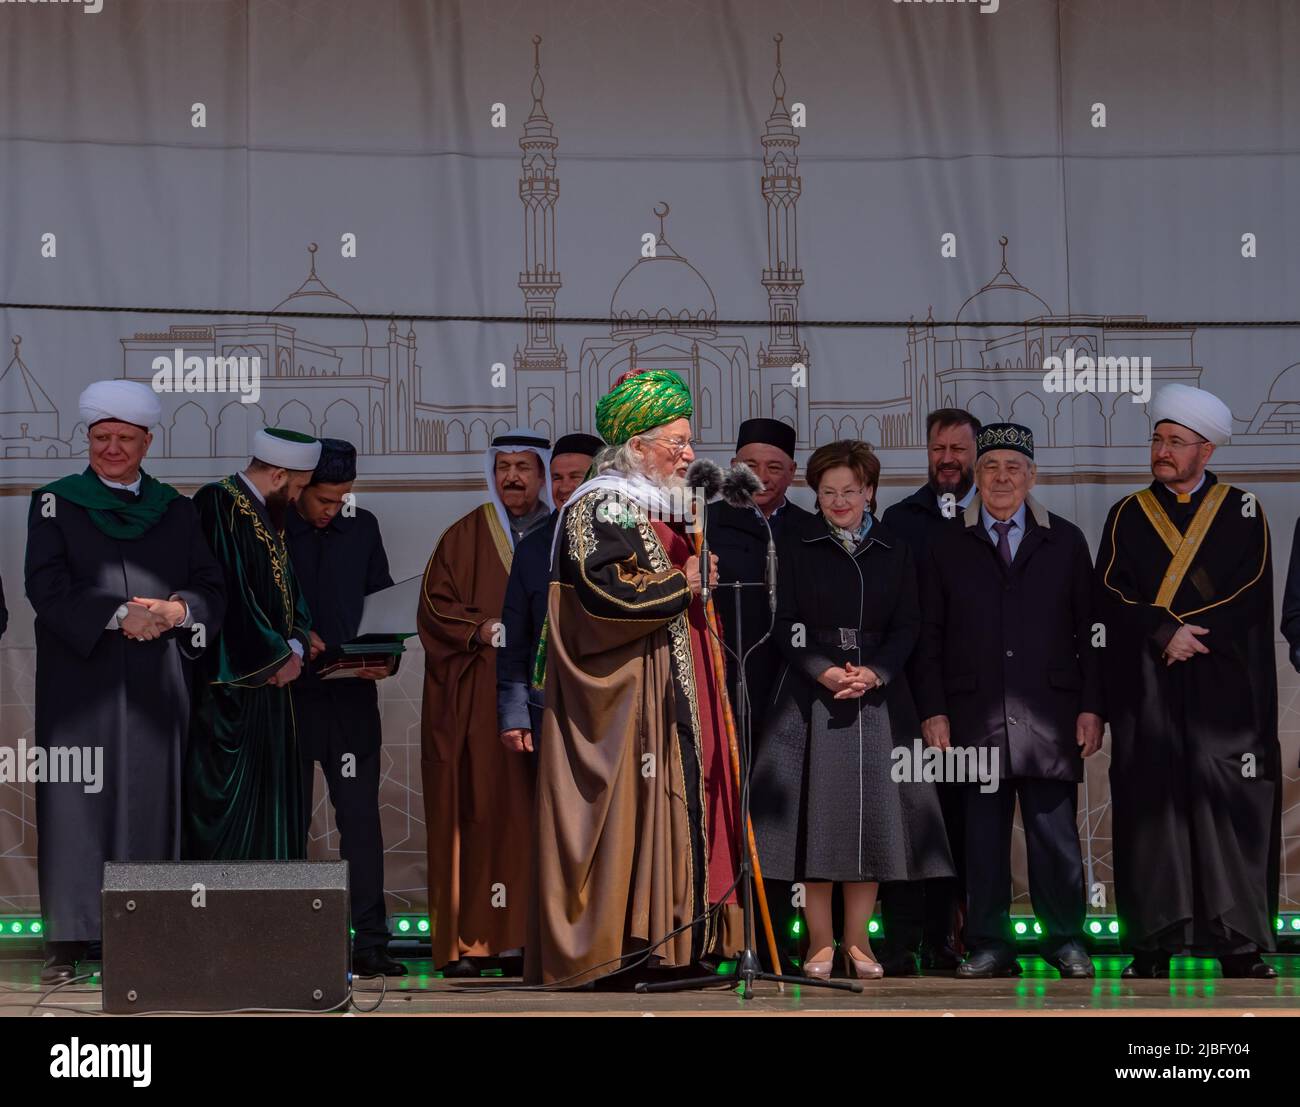 Bolgar, Tatarstan, Russia. May 21, 2022. Political and religious figures of Russia and Tatarstan at the celebration of the 1,100th anniversary of the adoption of Islam. Speech by Russia's Supreme Mufti Talgat Tadzhuddin Stock Photo